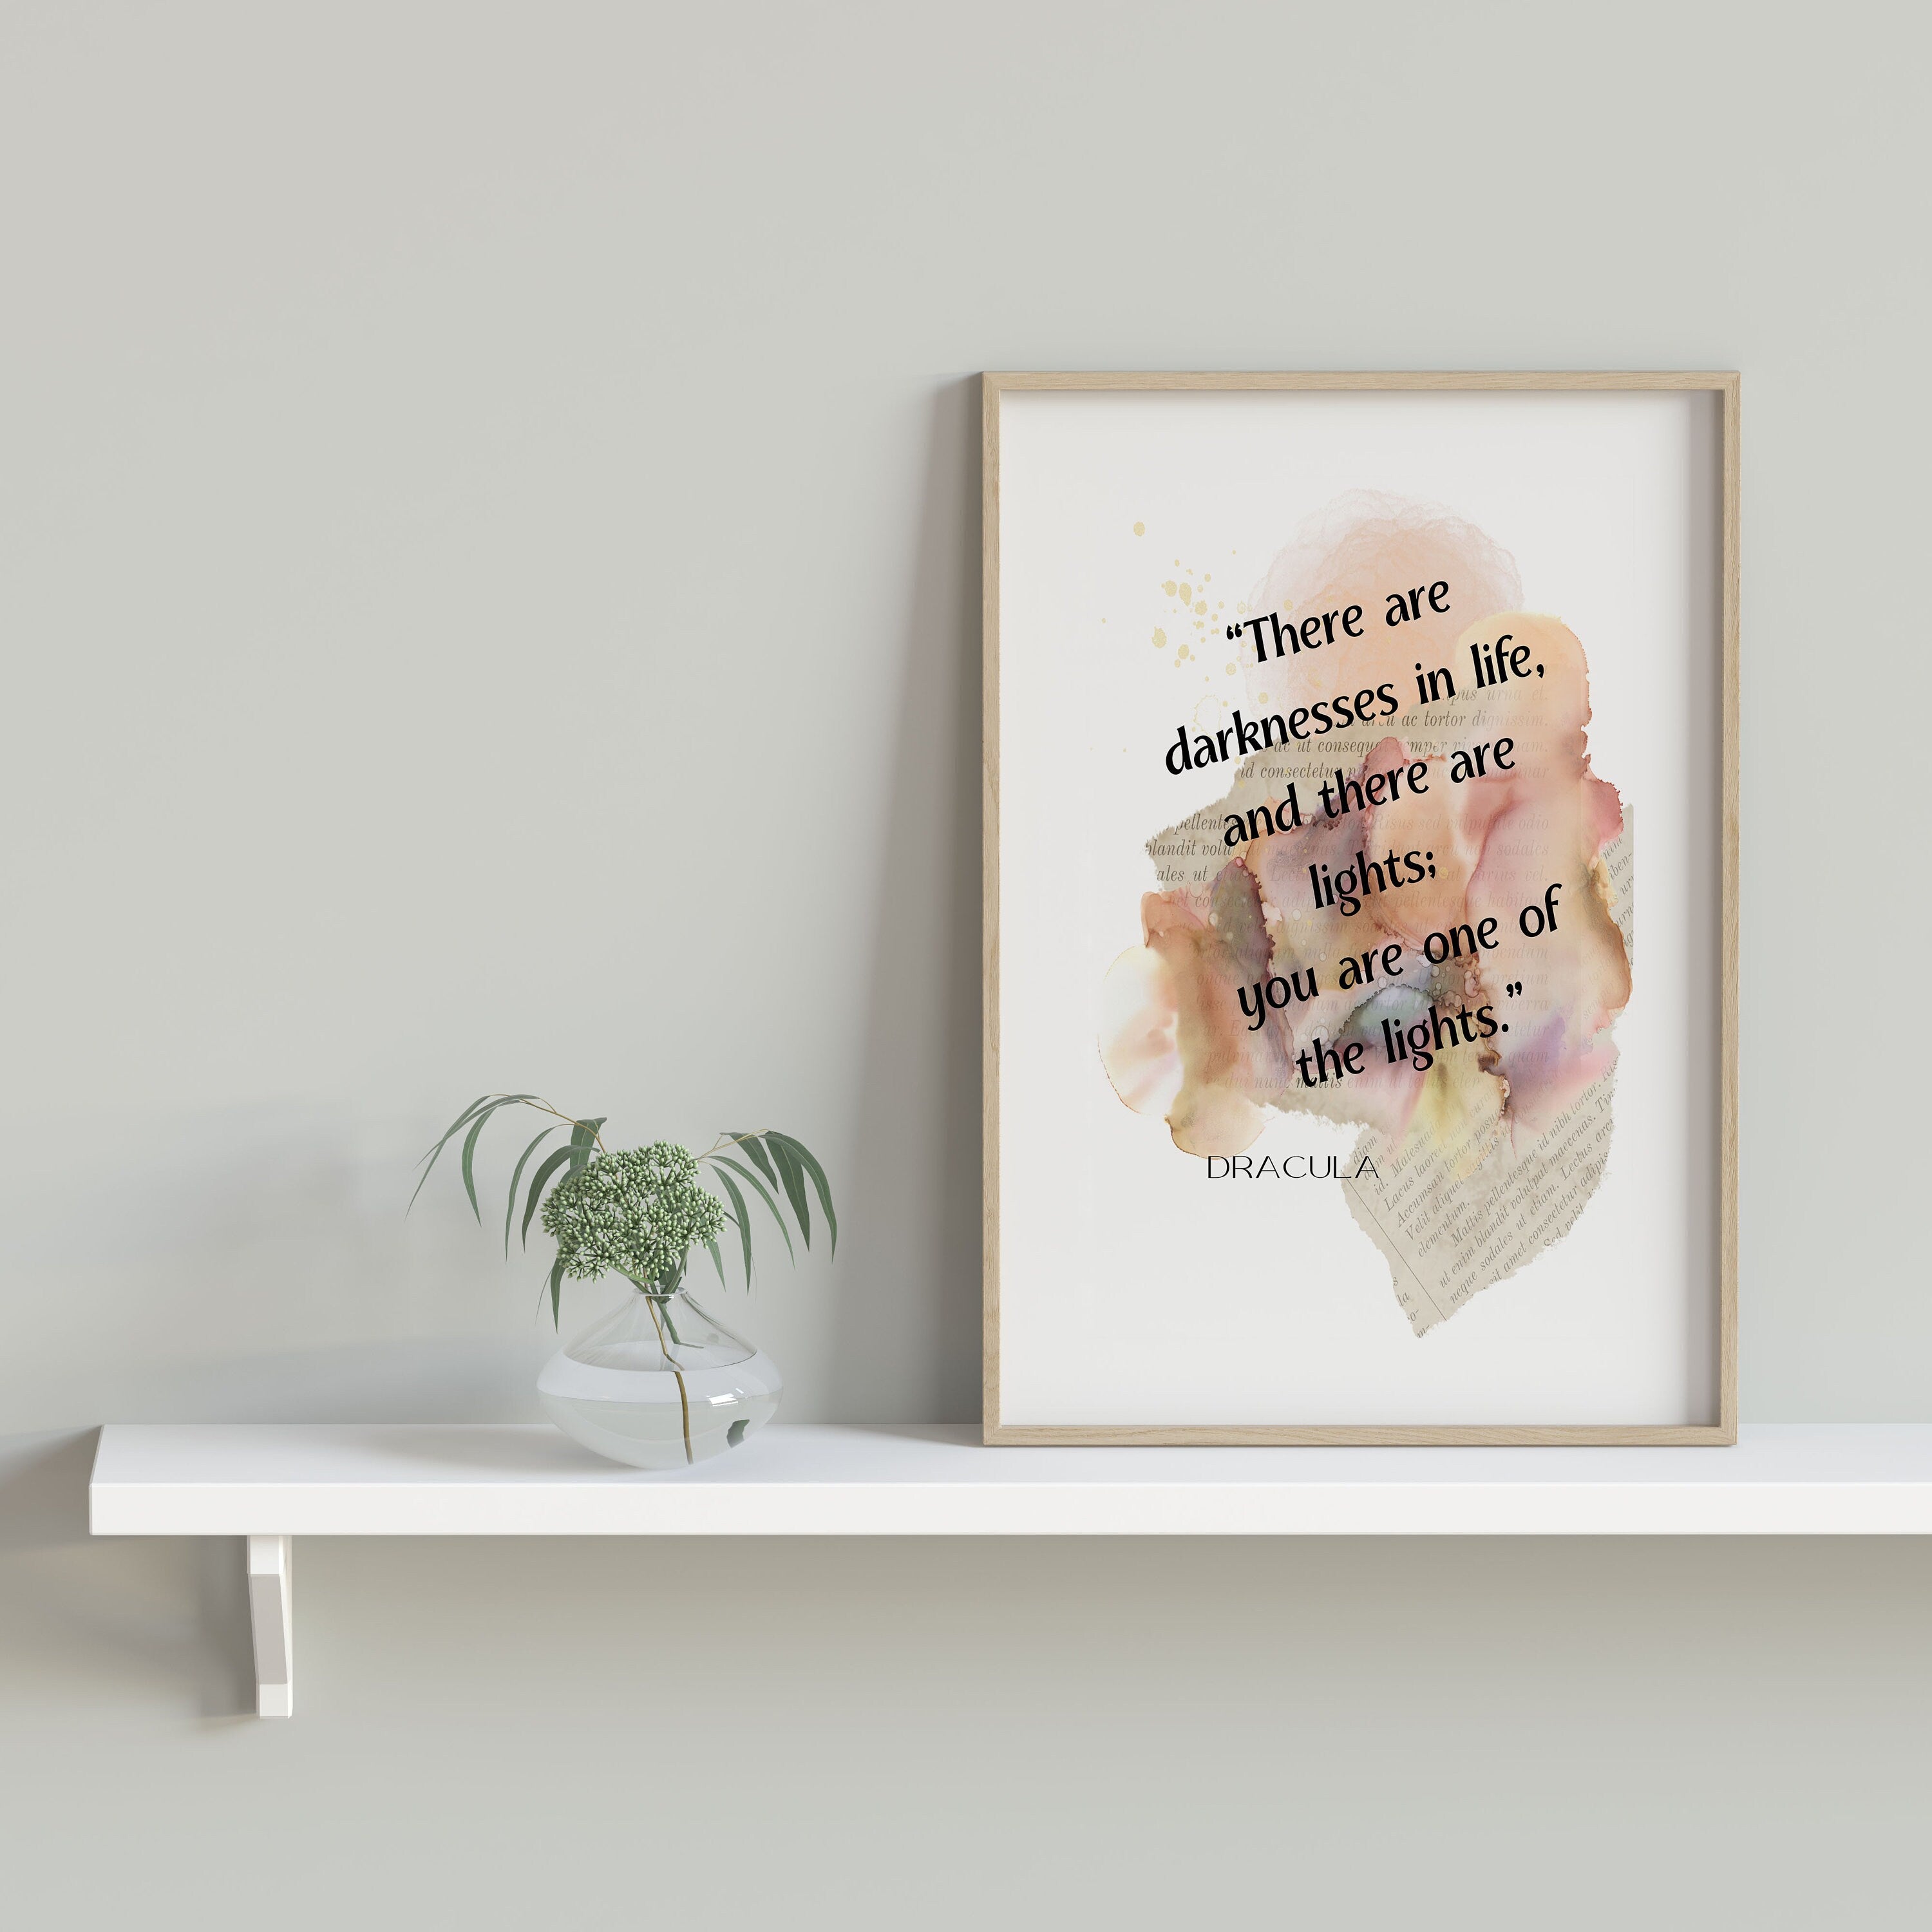 Dracula Quote Print You Are The Light, Bram Stoker Inspirational Quote Wall Art Prints Framed or Unframed